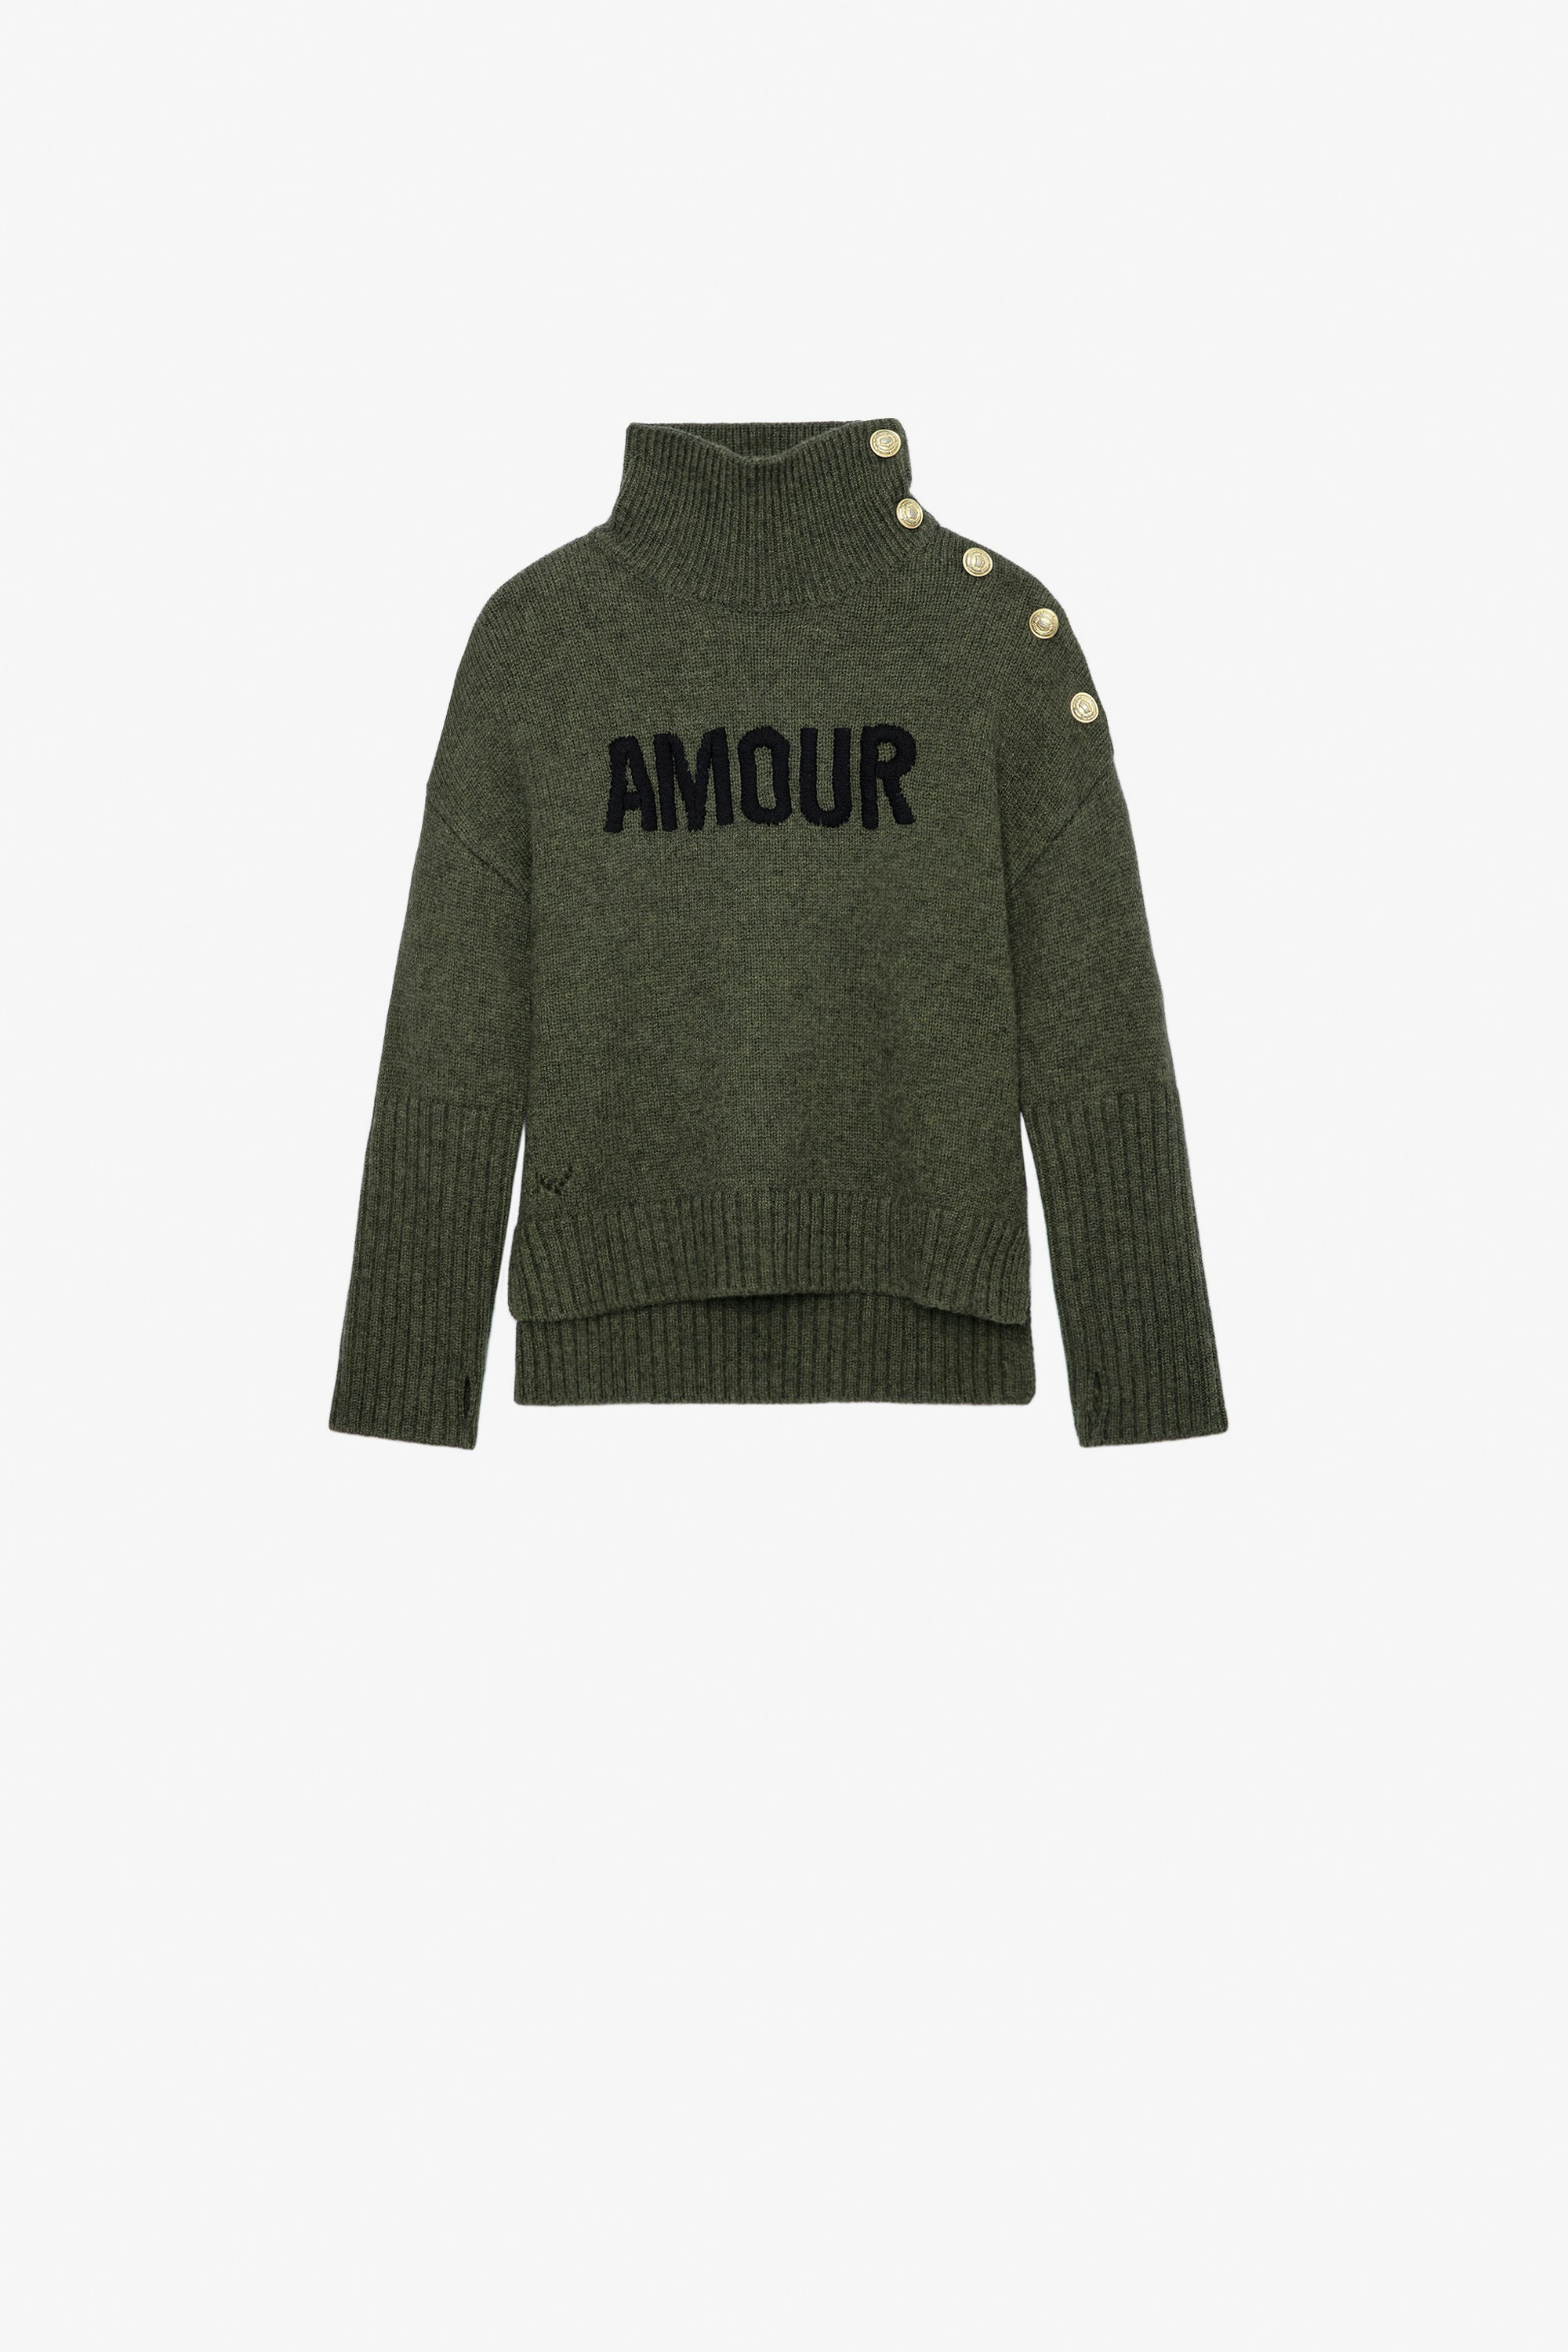 Alma Girls’ Jumper Girls’ khaki knit turtleneck jumper with “Amour” embroidery.